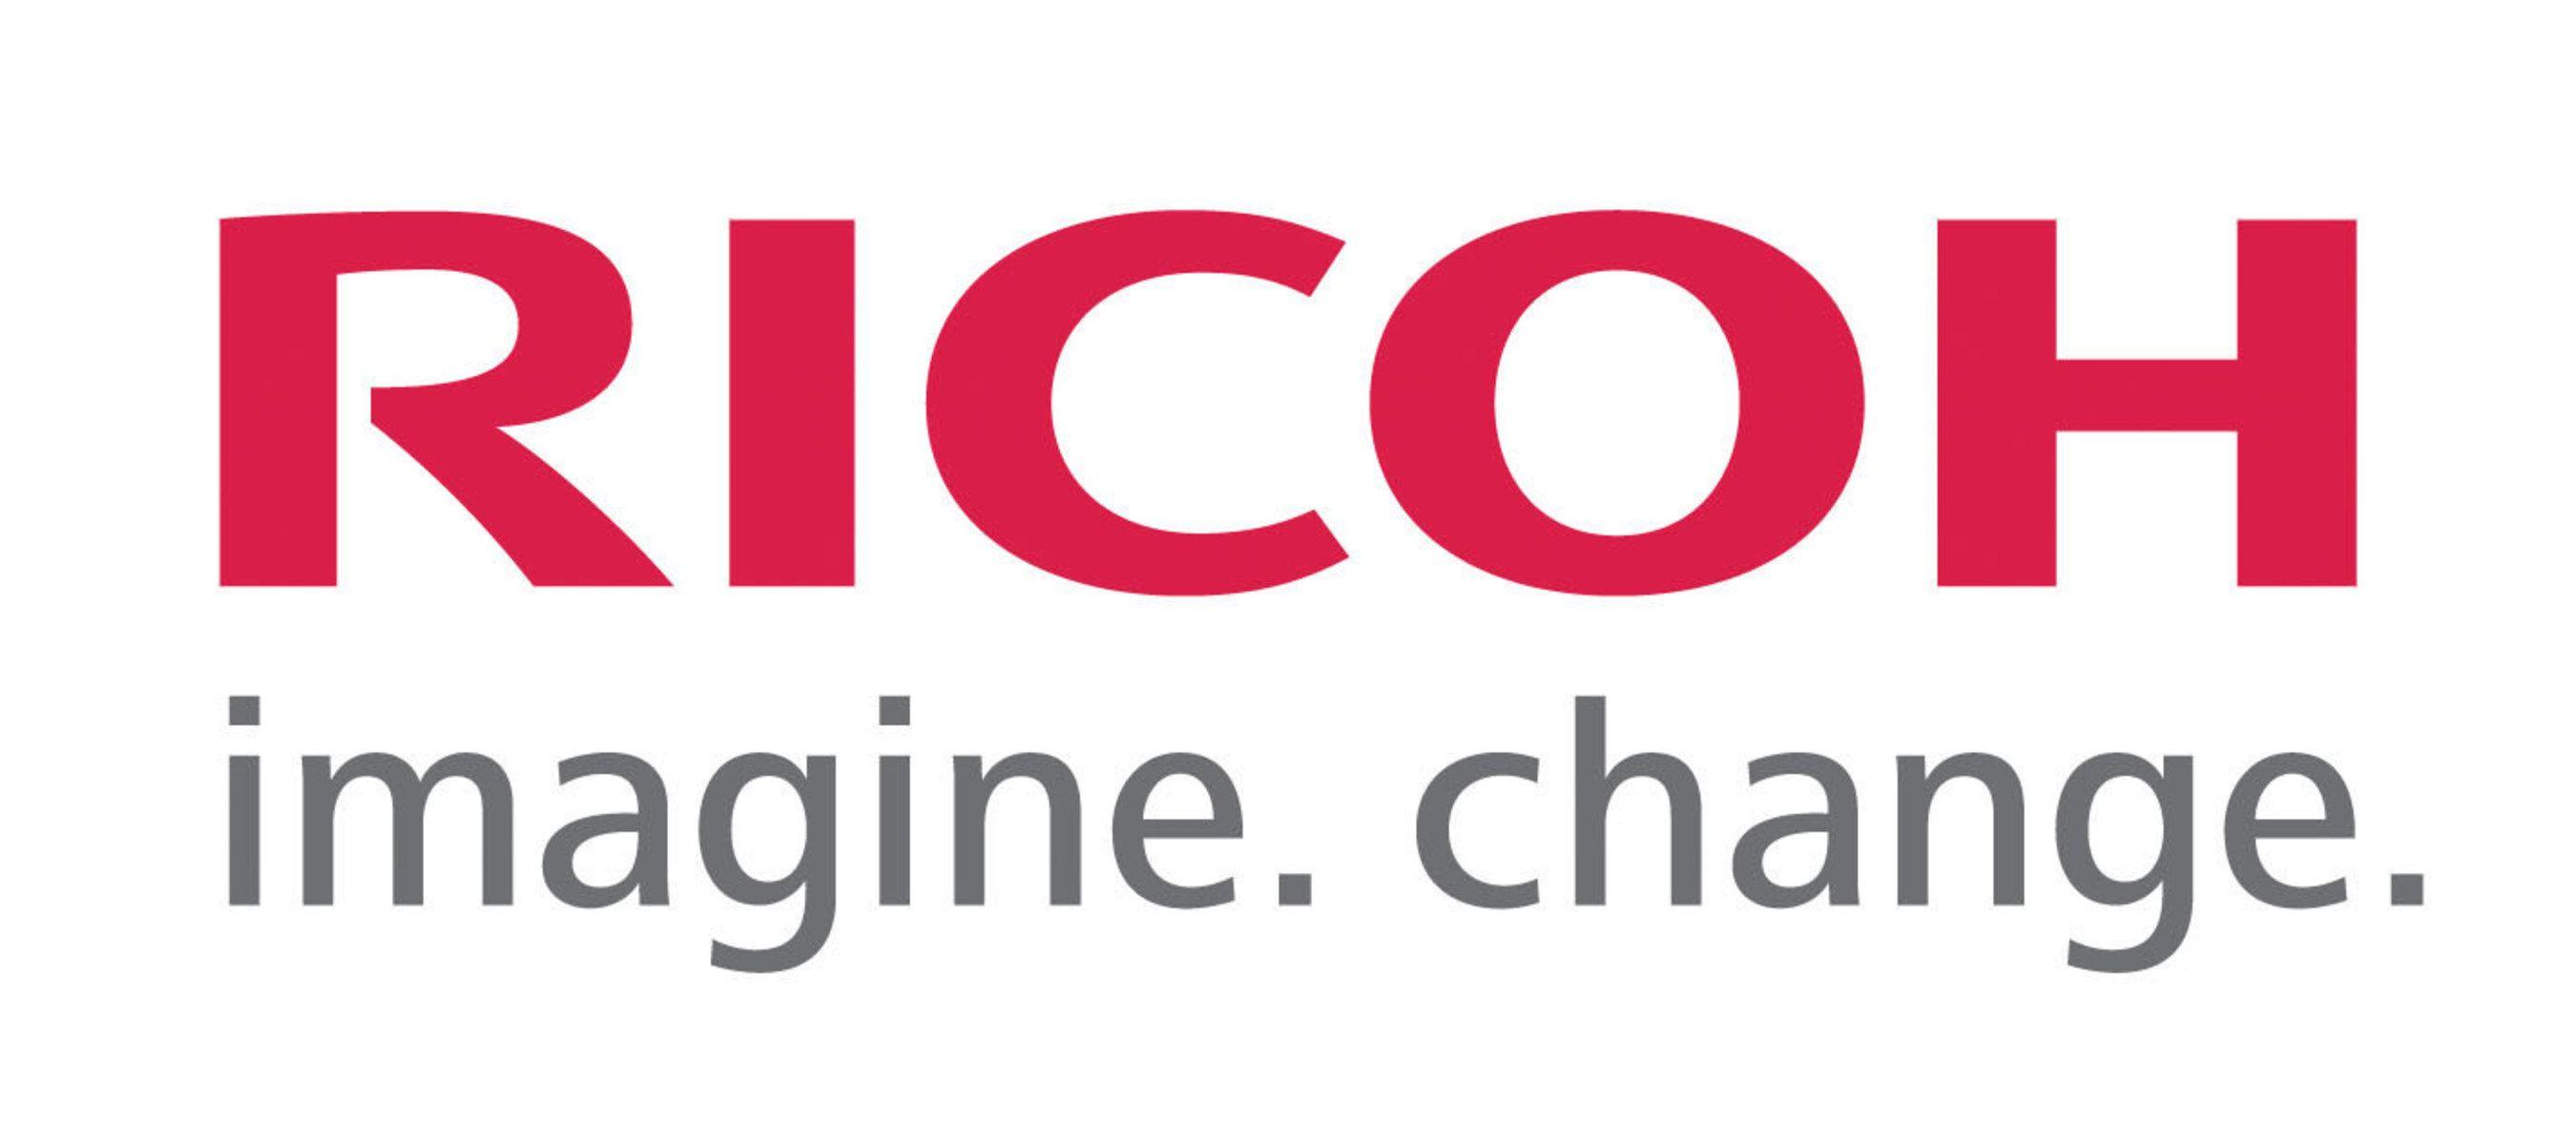 Ricoh Imagine Change Logo - Laser projector series from Ricoh shines new light on sharing ...